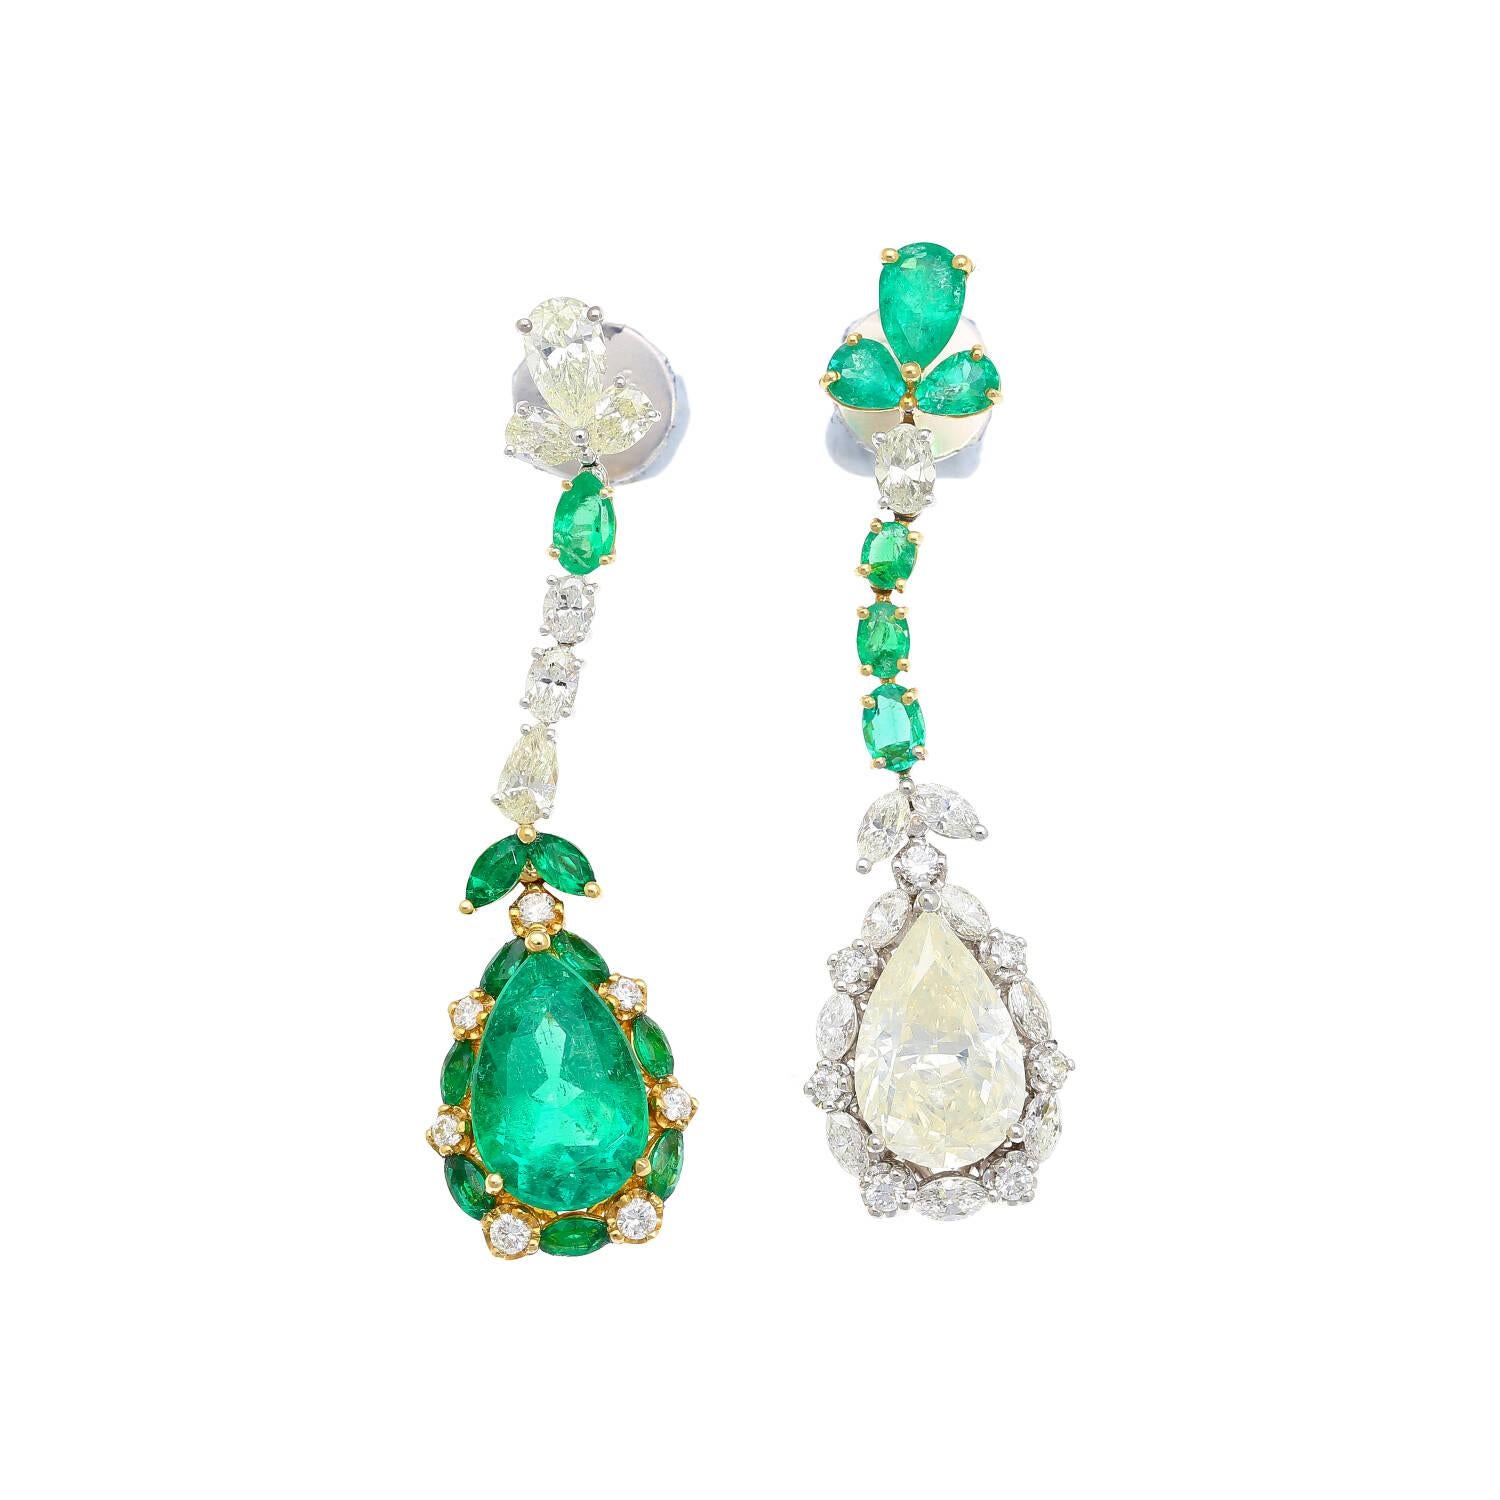 10 Carat Pear Cut Mirrored Emerald and Diamond Drop Earrings in 18k Gold In New Condition For Sale In Miami, FL